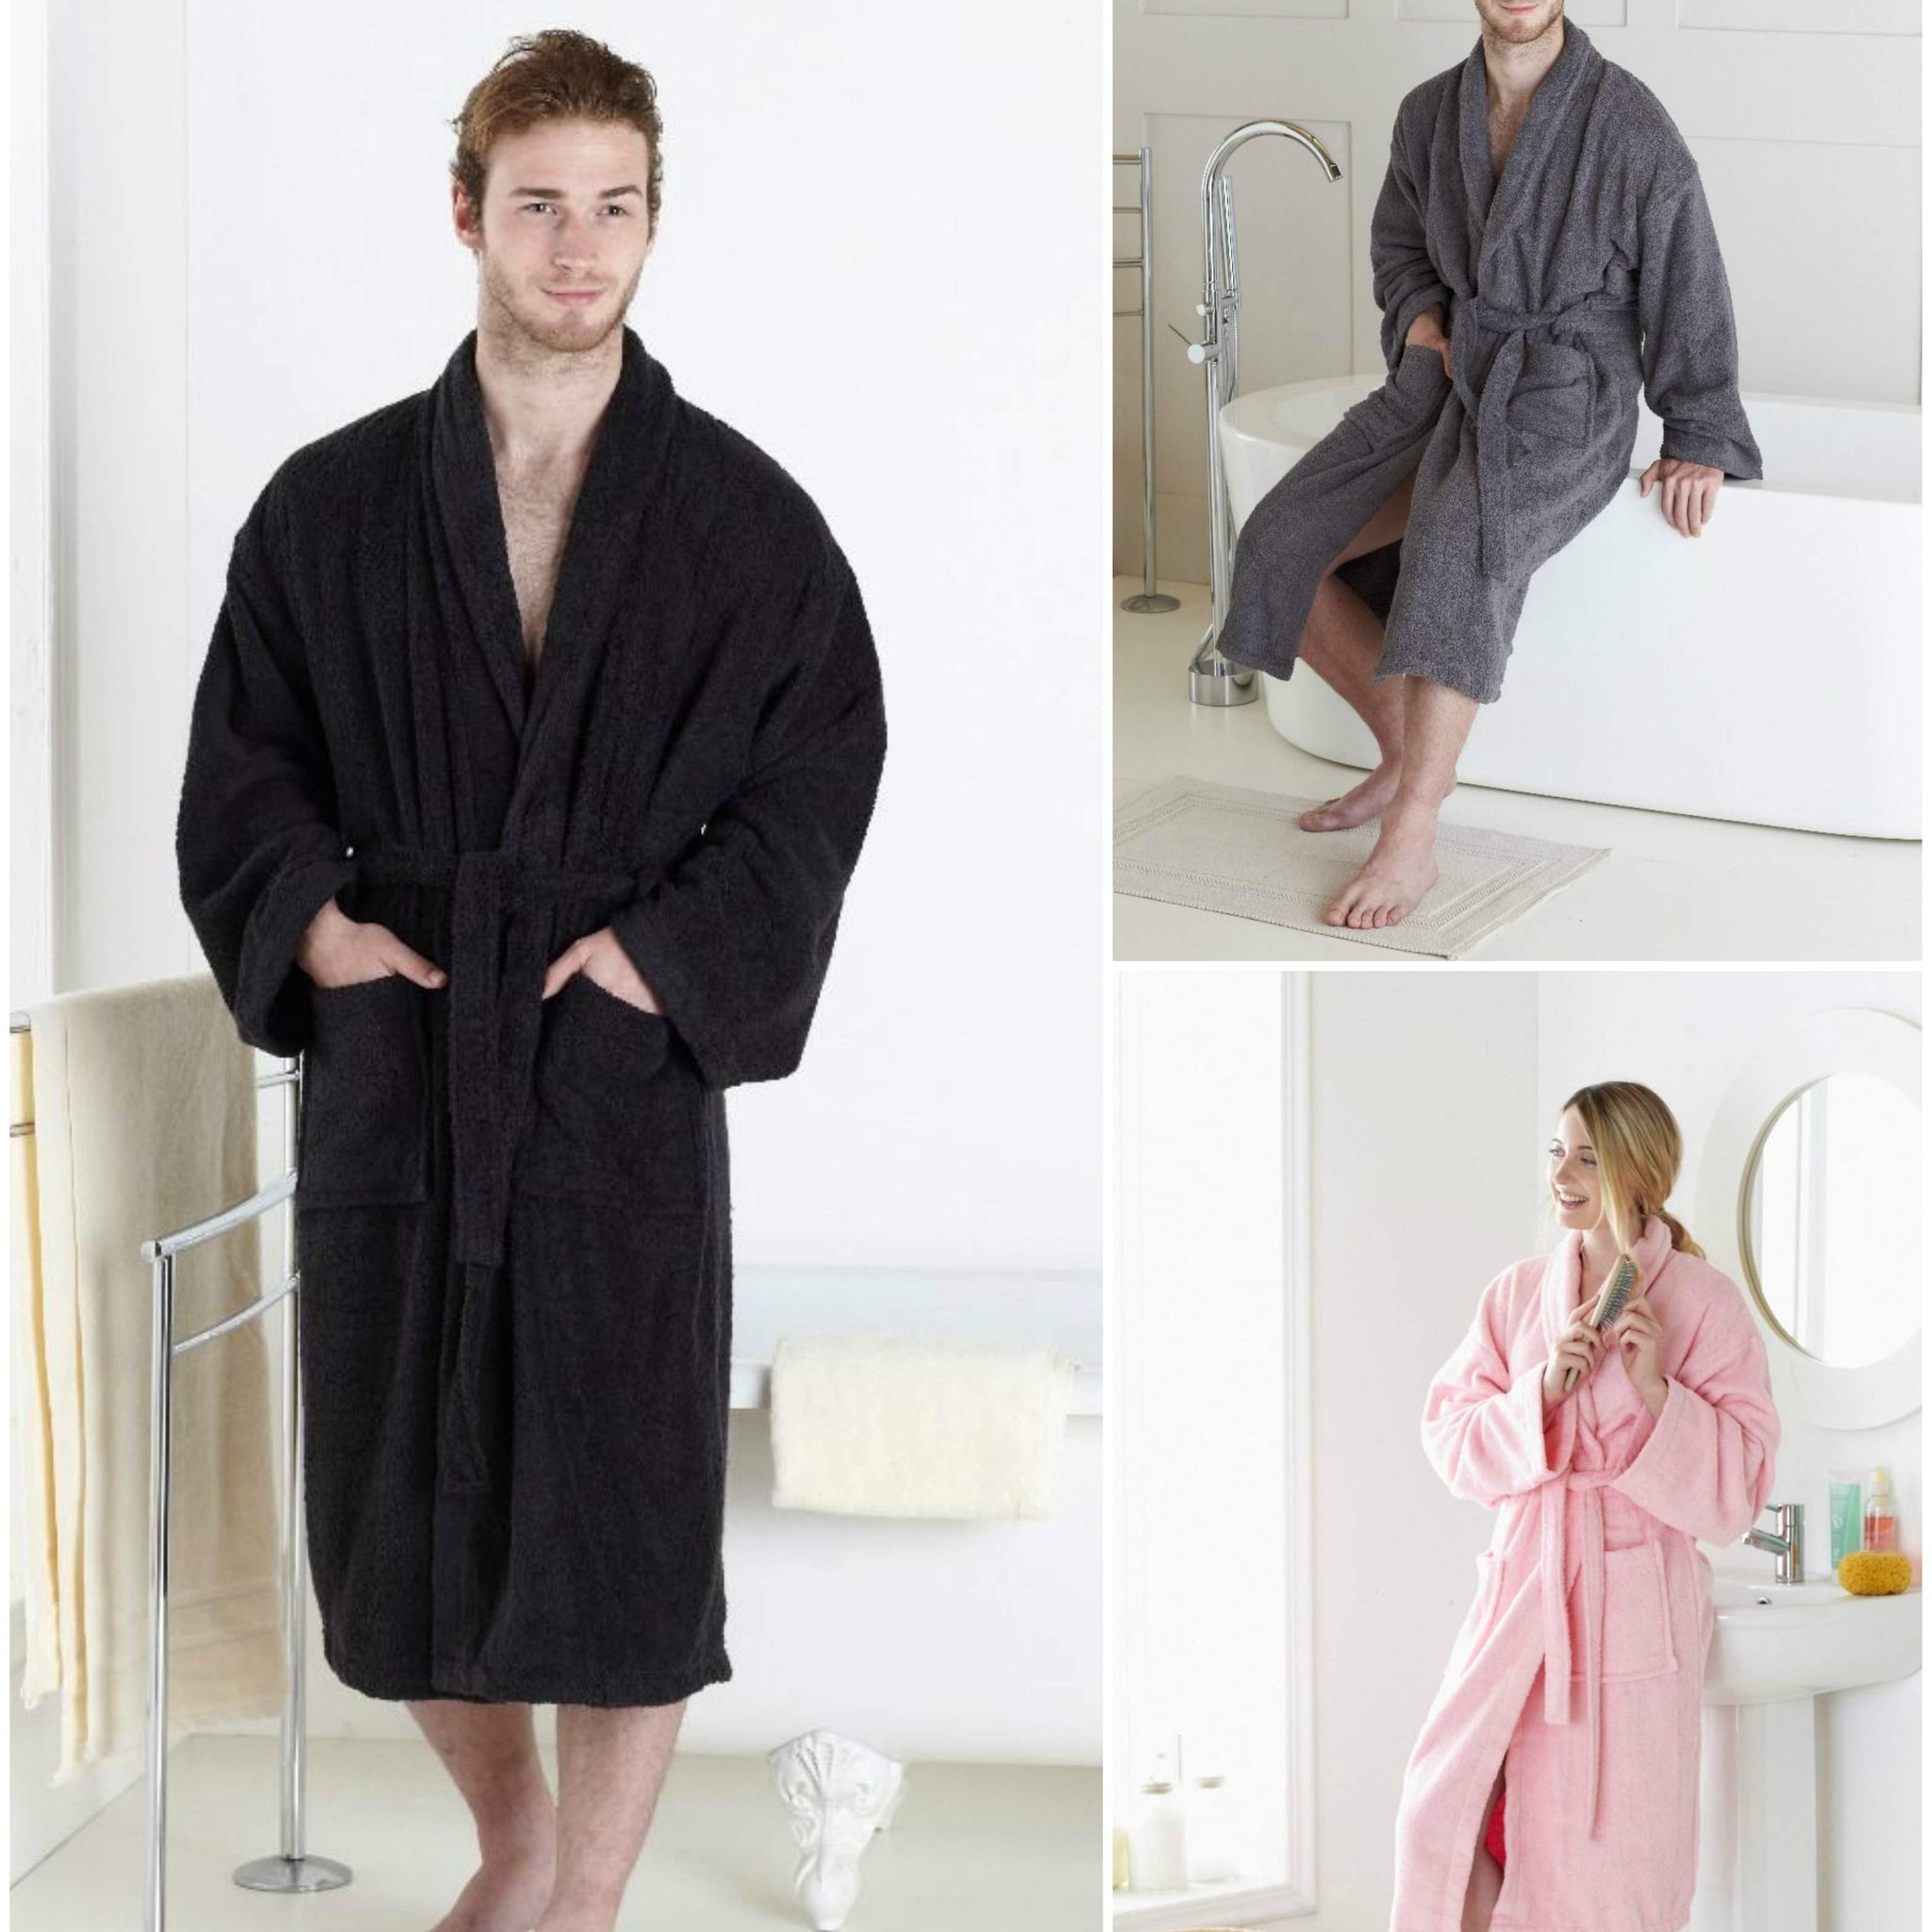 Luxury 100% Egyptian cotton Unisex Bath Robe Shawl Collar Dressing Gown Bed and Bath Linen